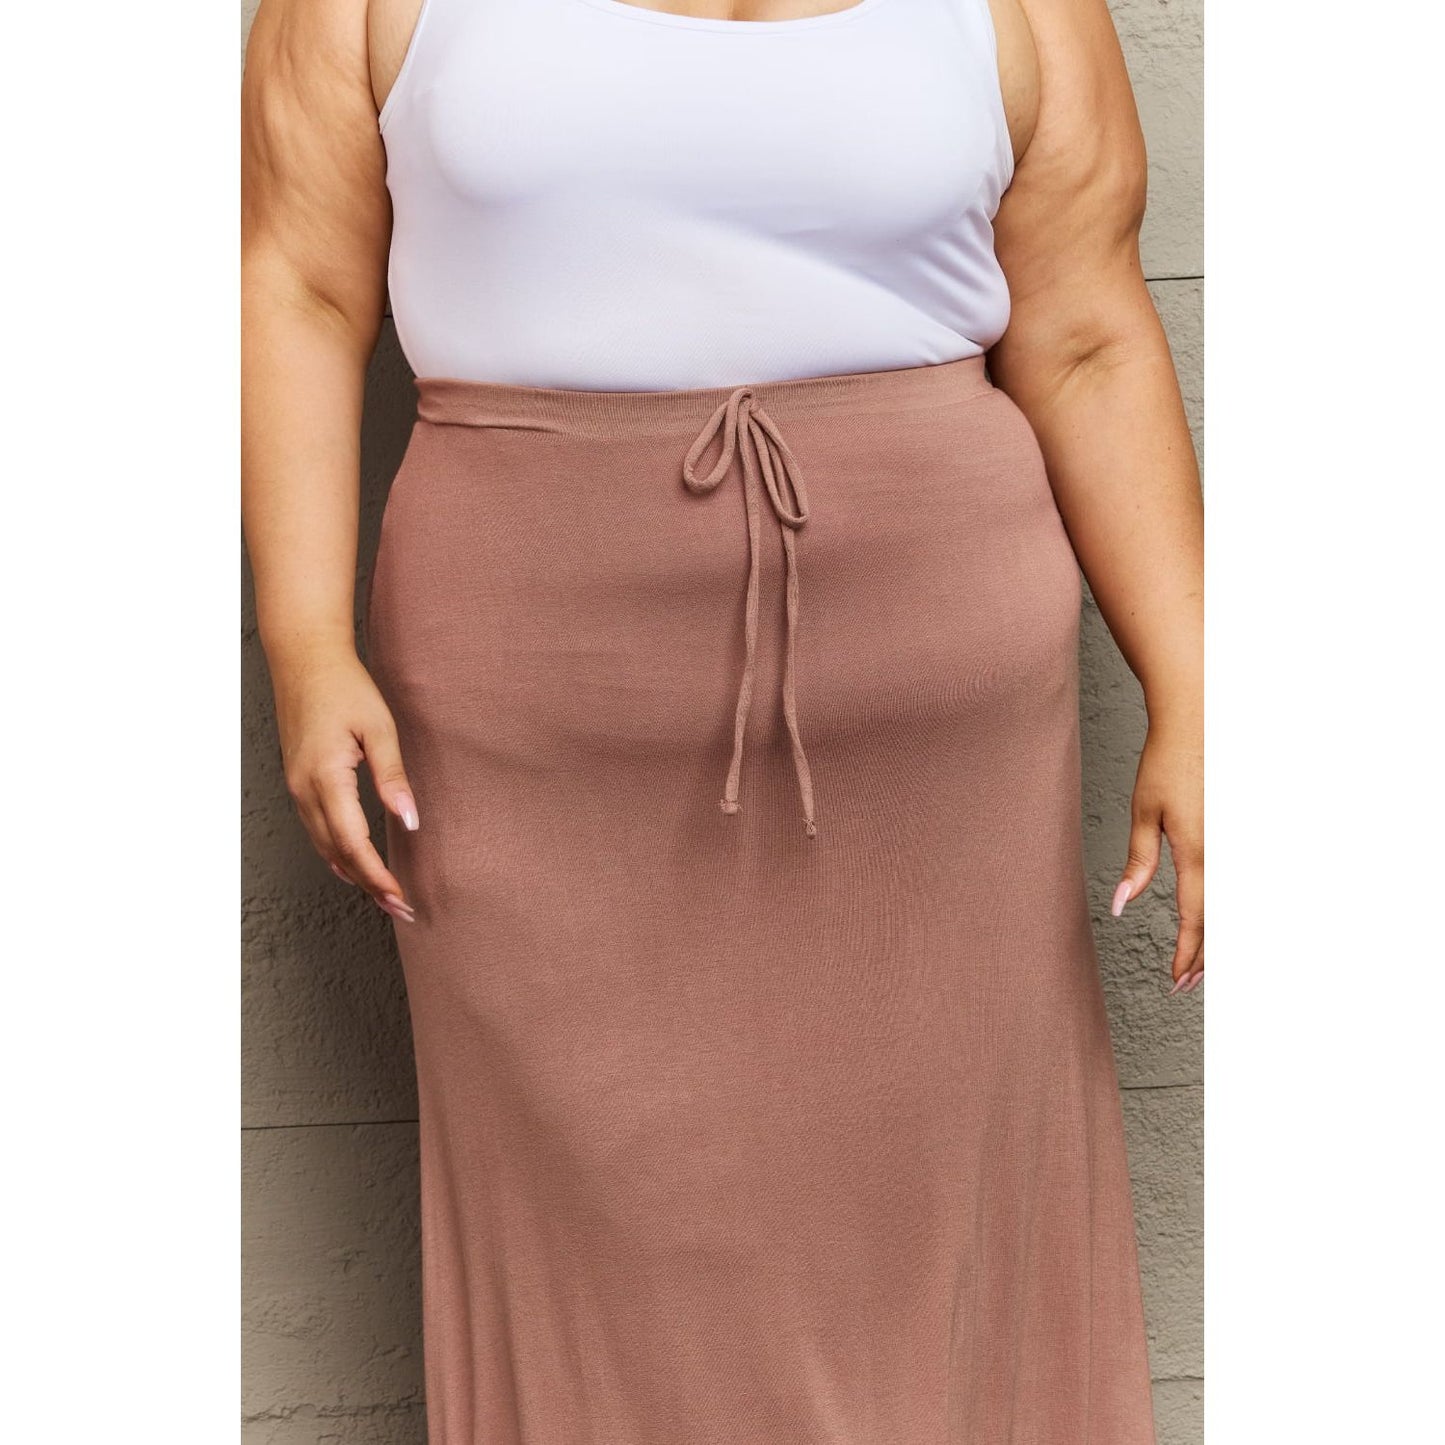 Culture Code For The Day Full Size Flare Maxi Skirt in Chocolate - TiffanyzKlozet